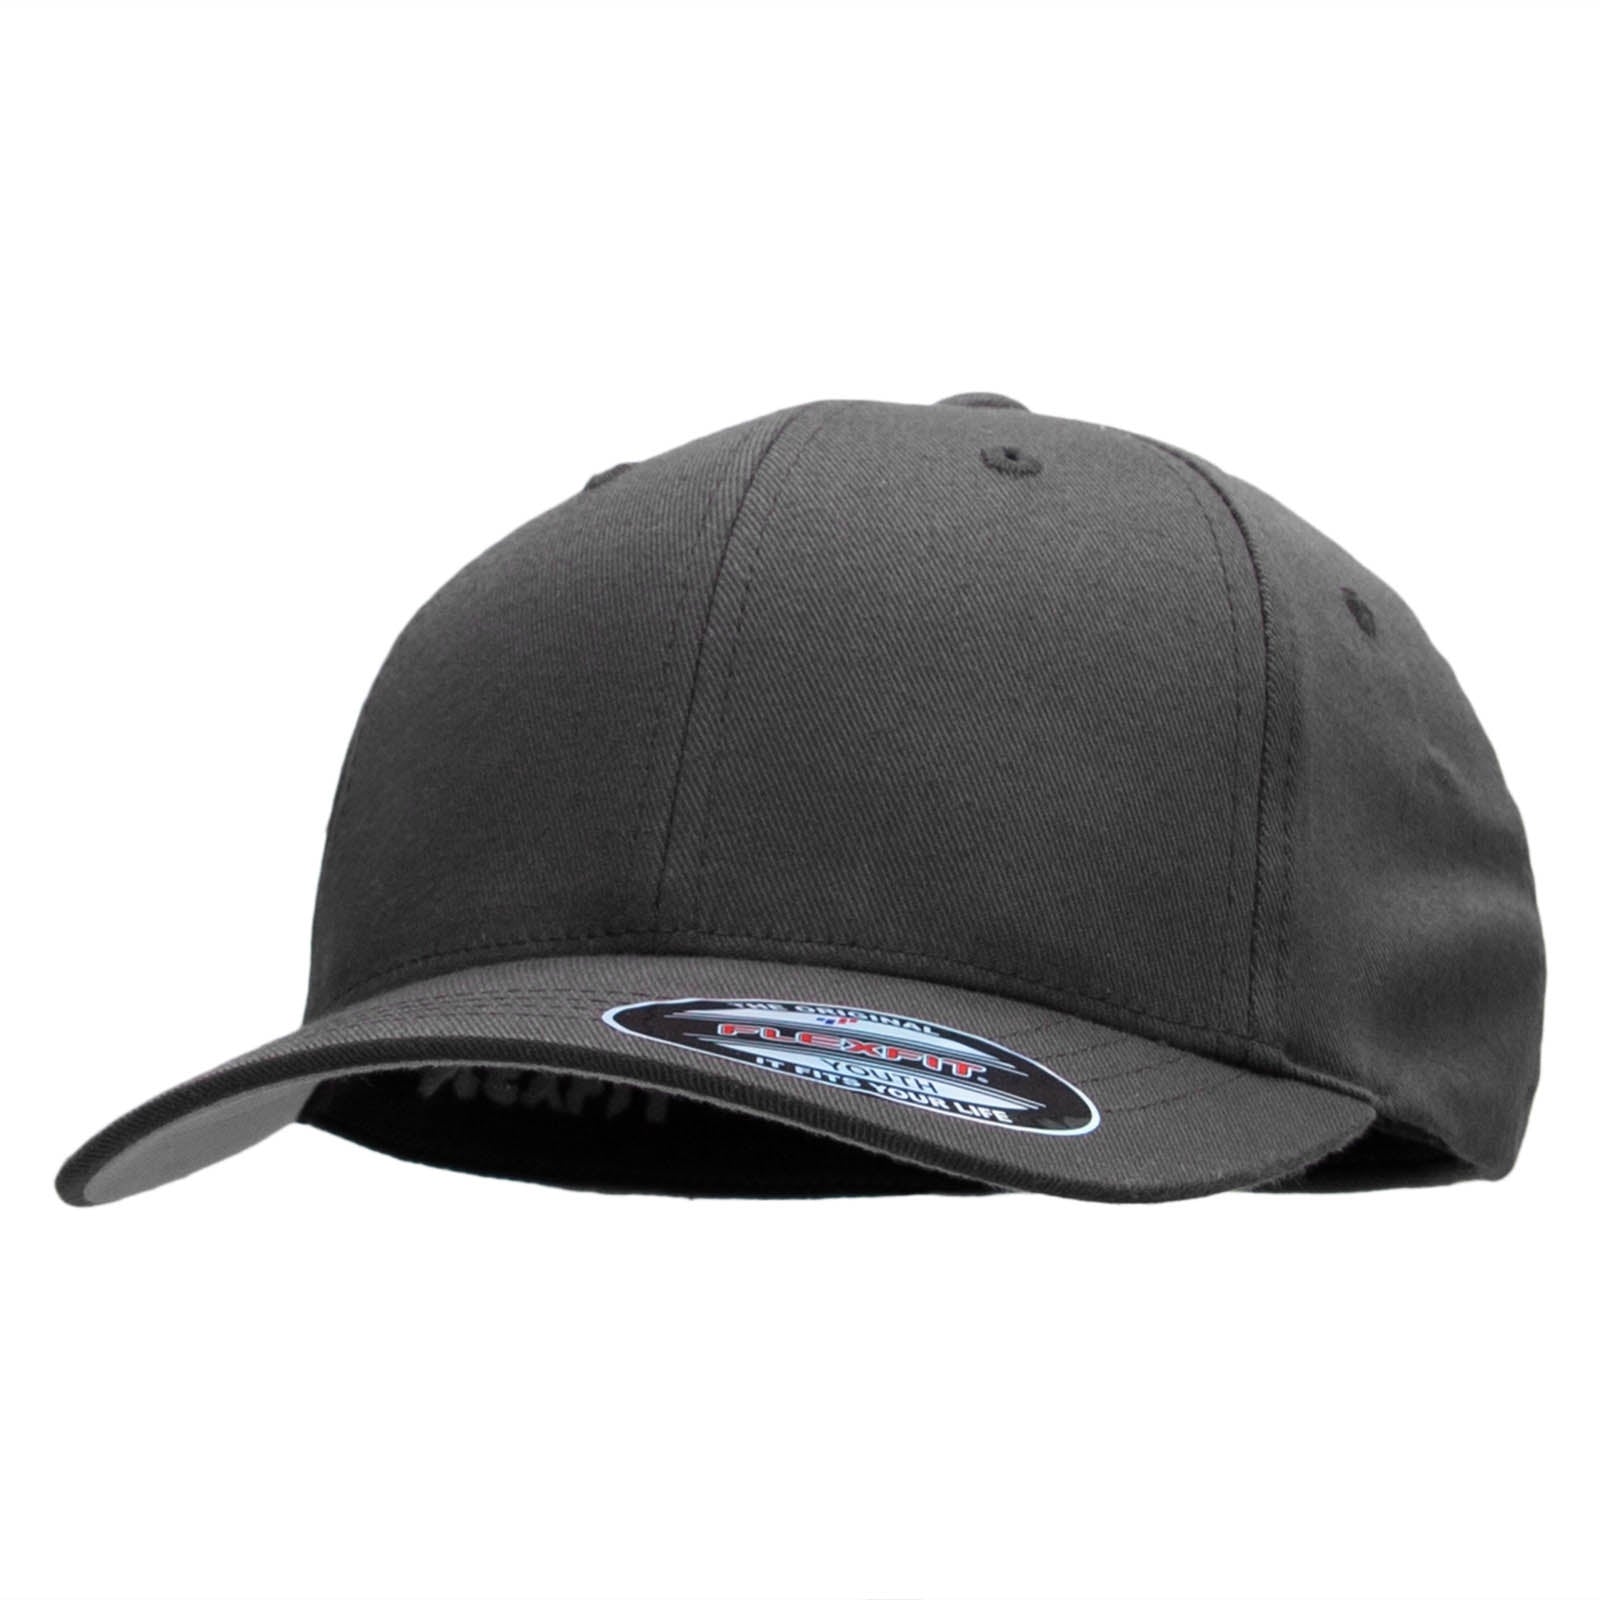 Flexfit Youth Wooly Combed Twill Cap | Flexible/Fitted/Size Cap | e4Hats –